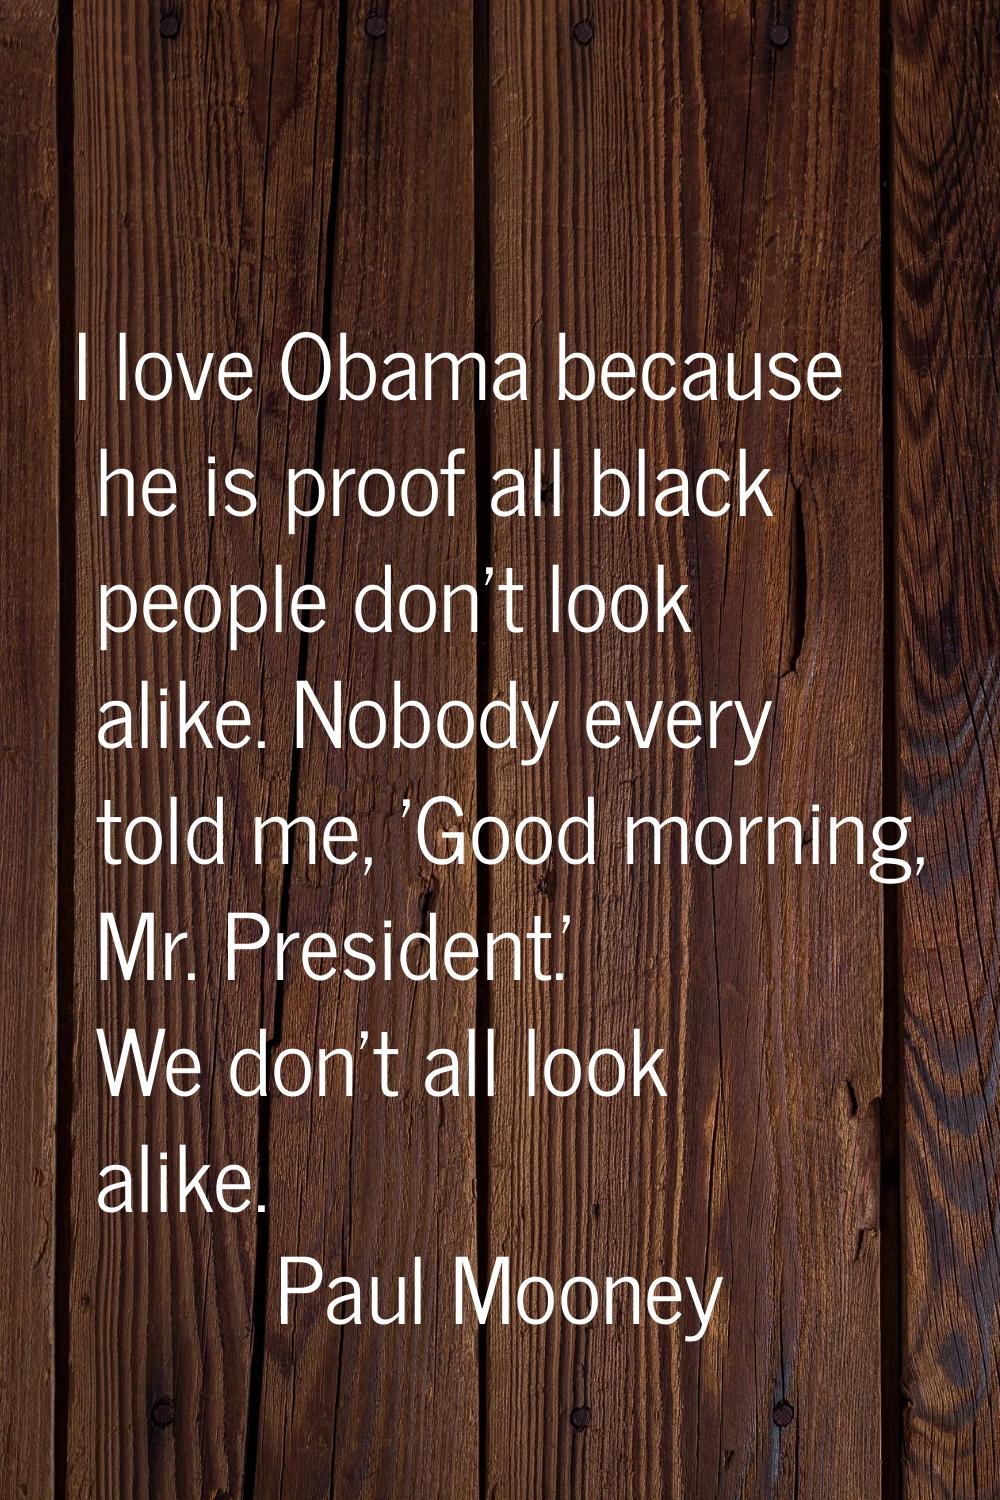 I love Obama because he is proof all black people don't look alike. Nobody every told me, 'Good mor